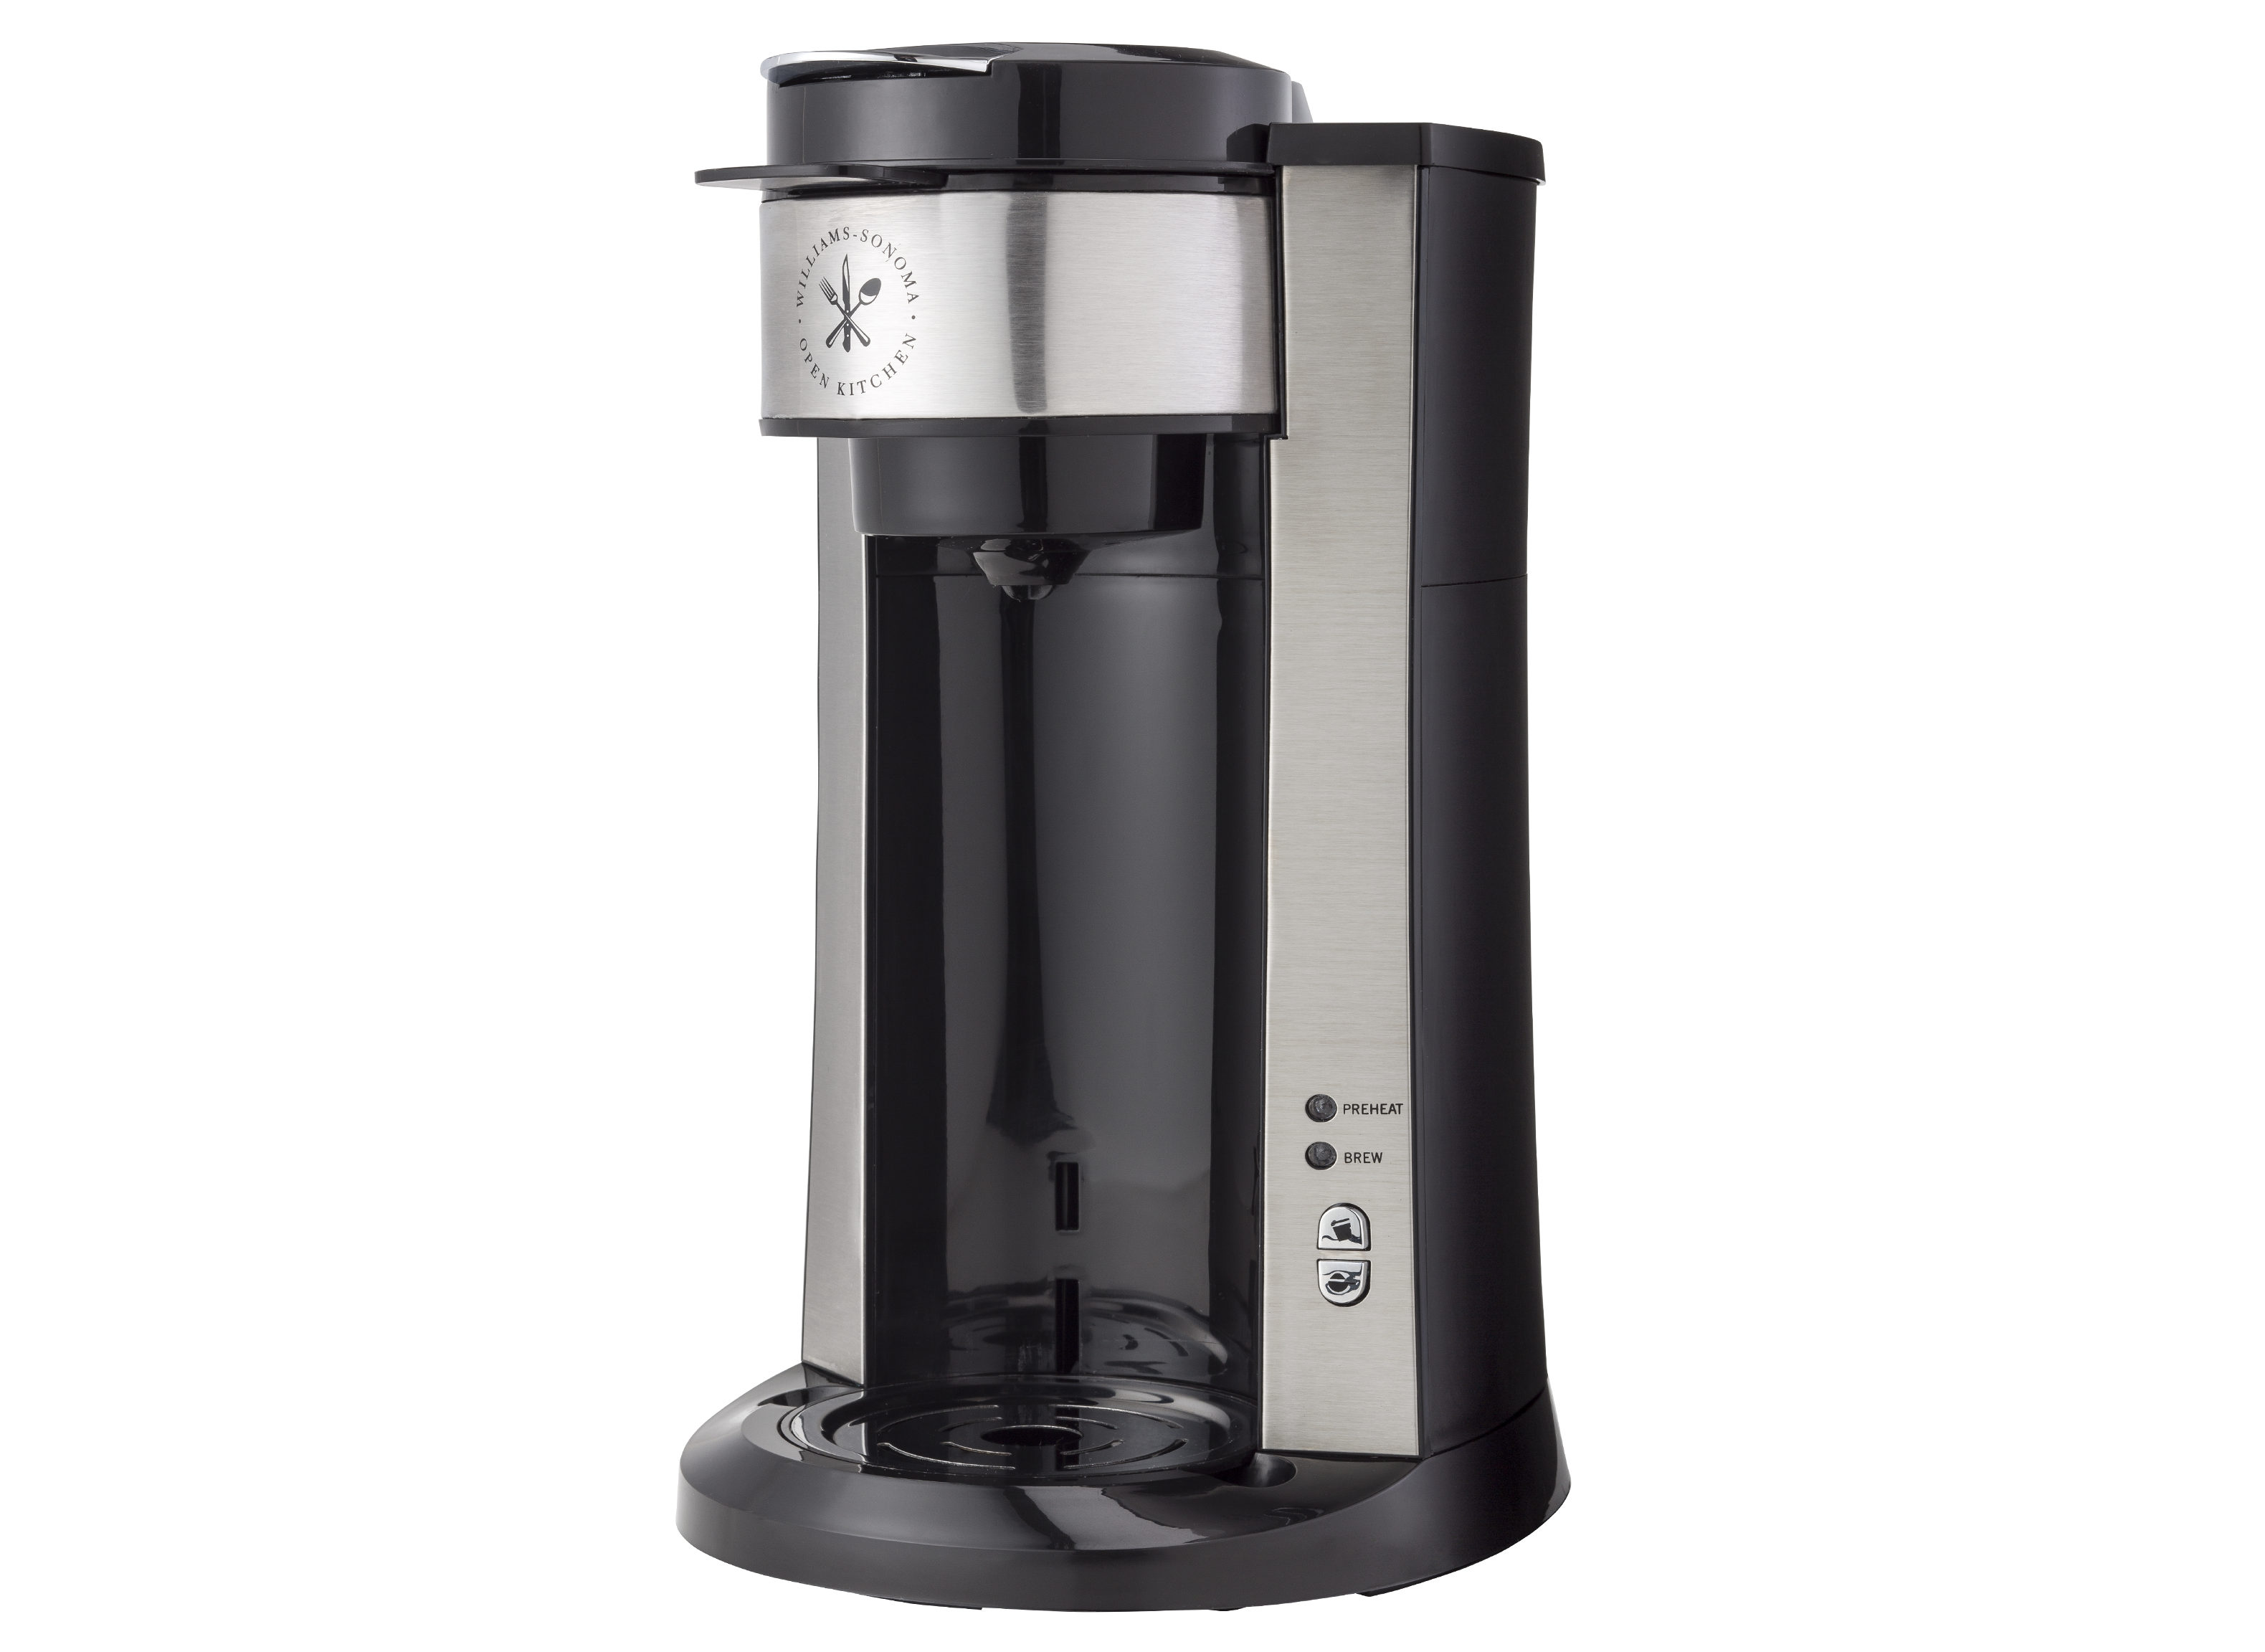 https://crdms.images.consumerreports.org/prod/products/cr/models/392441-singleservecoffeemakers-williamssonoma-openkitchenkcupcoffeemaker.png